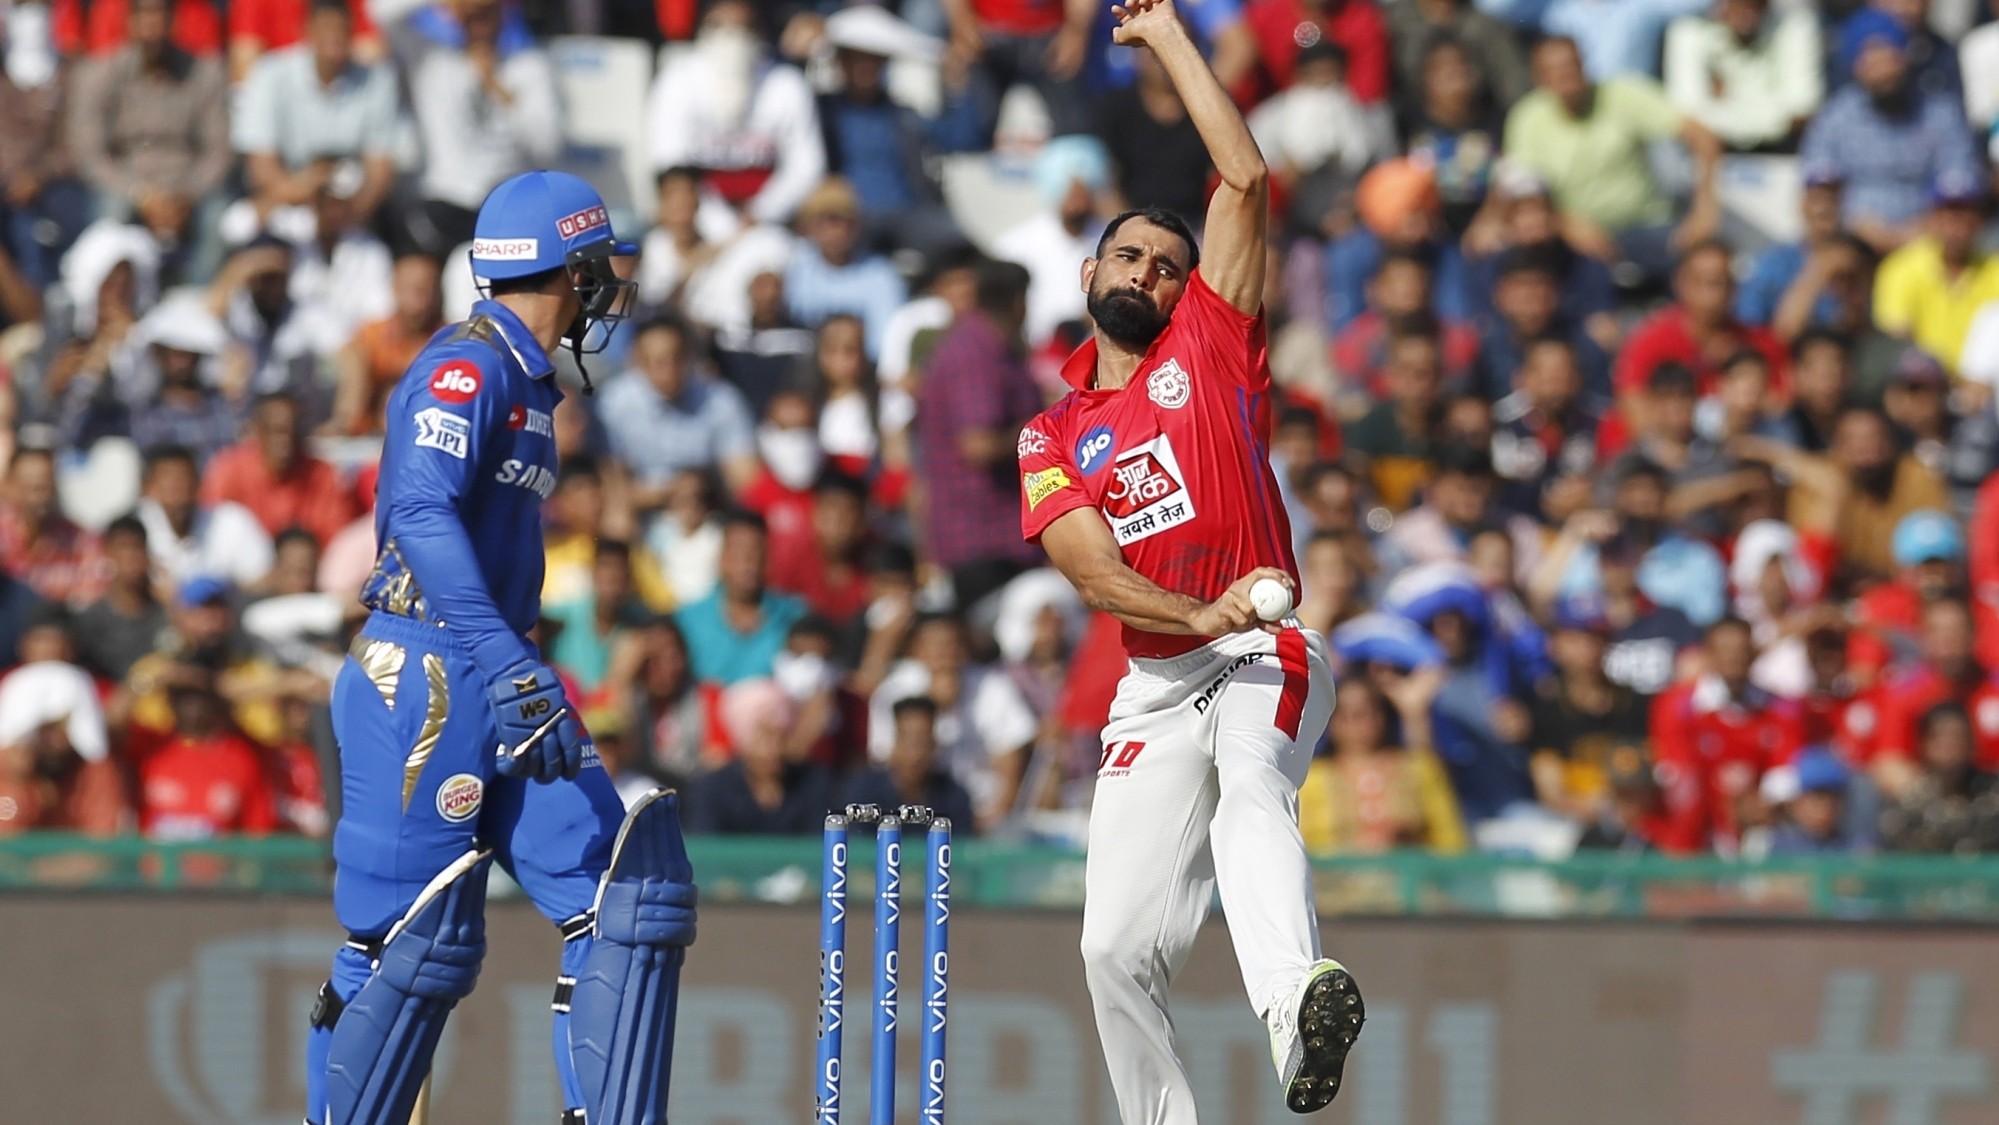 IPL 2020: Shami feels IPL is an ideal tournament to get into the groove for Australia tour